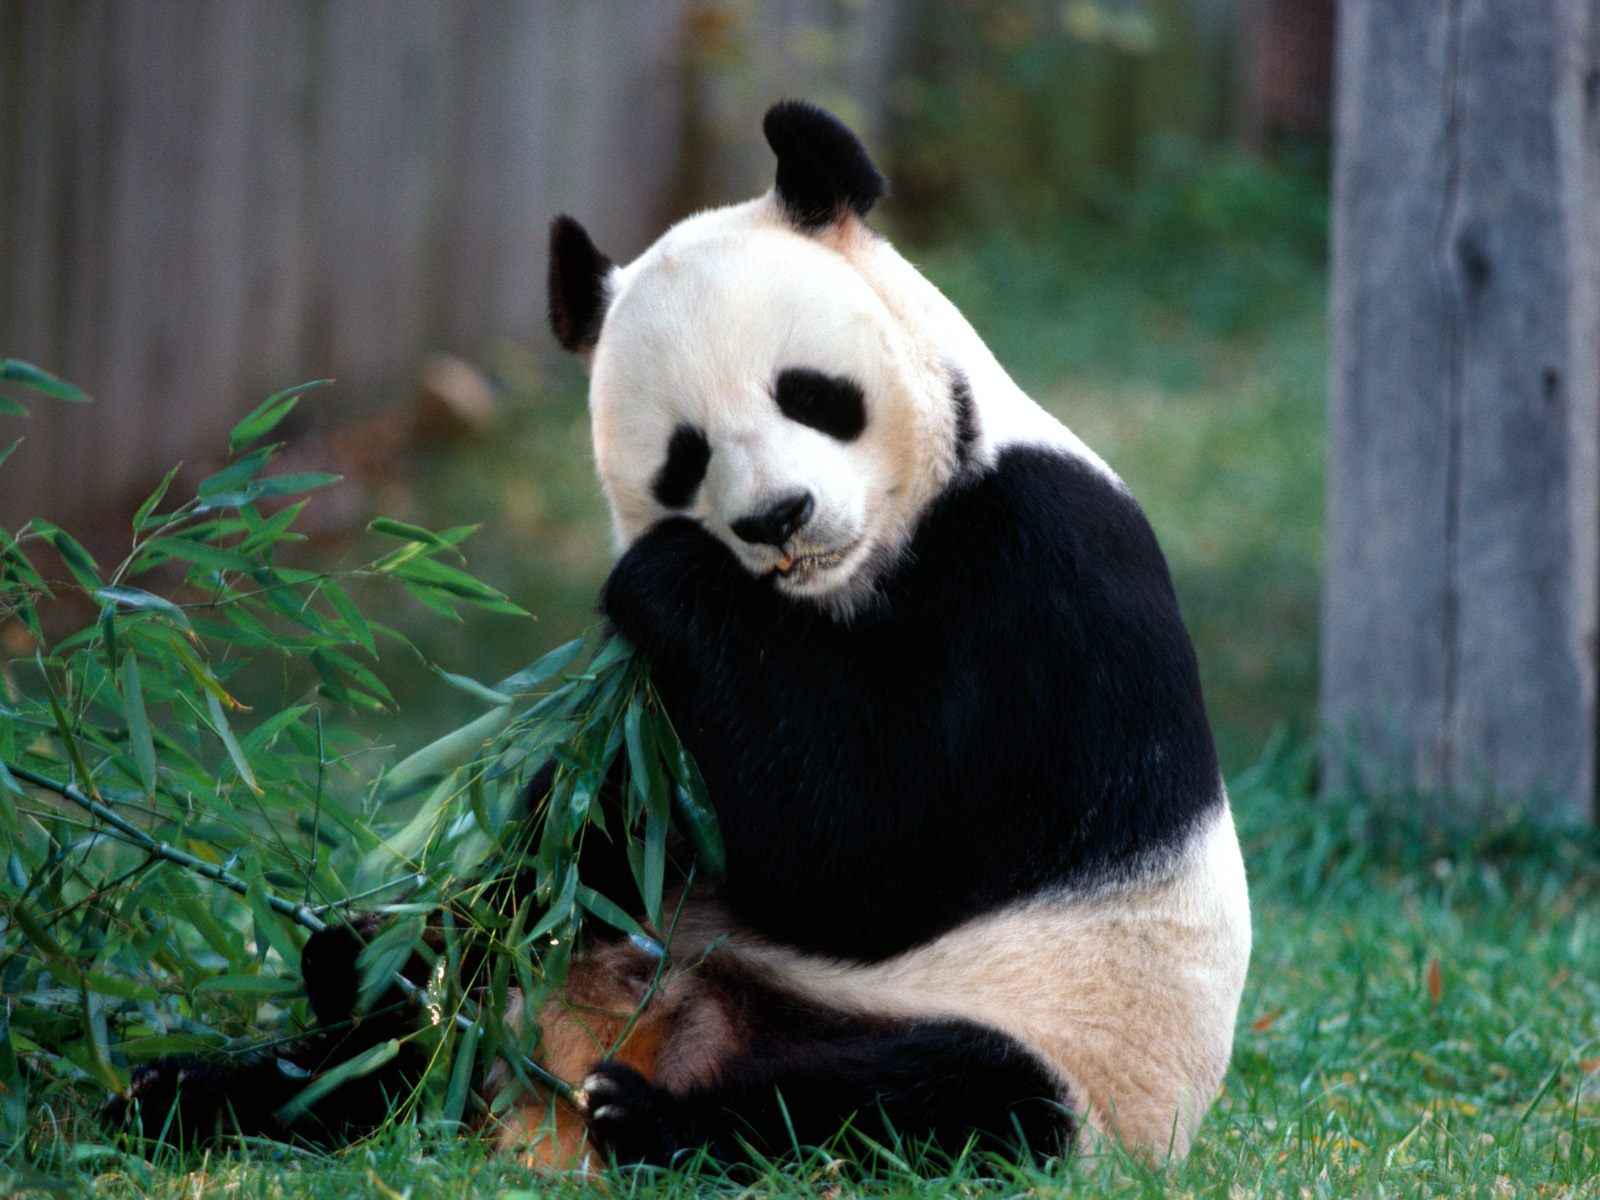 snack time panda bear pictures